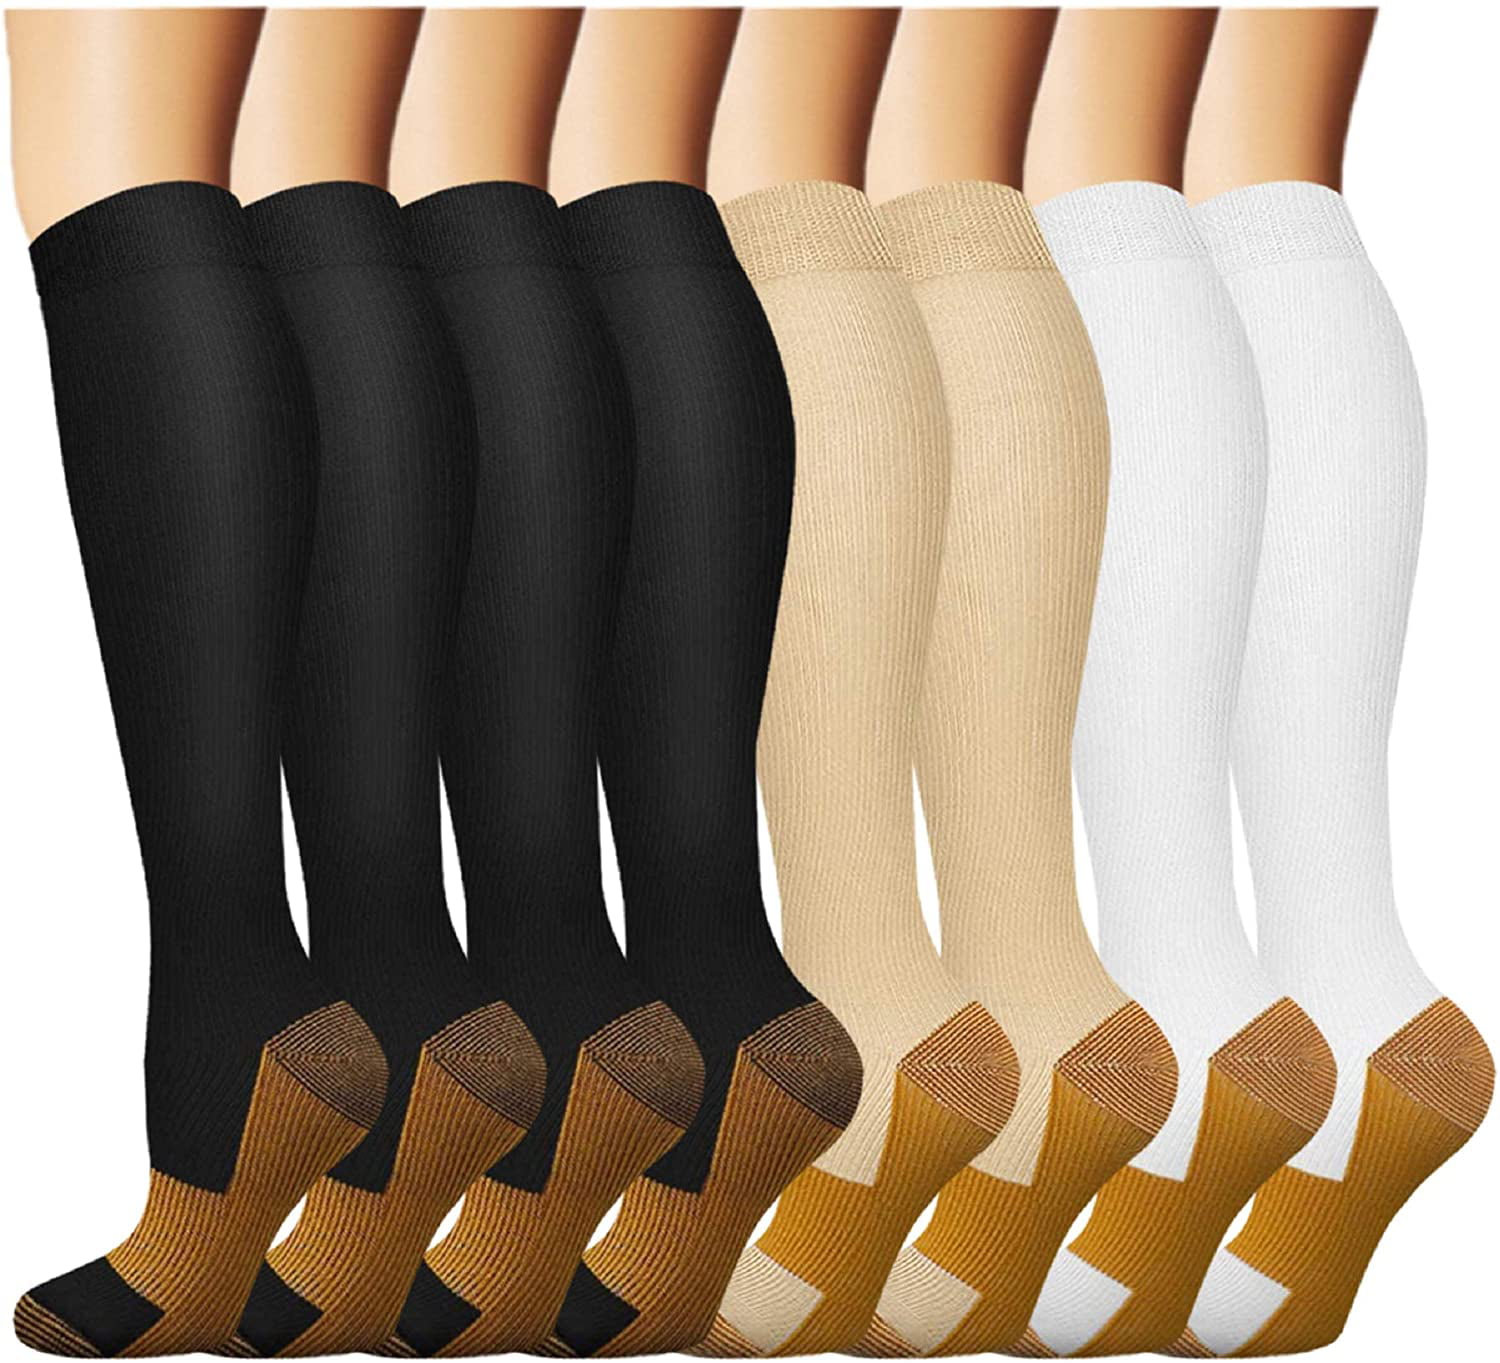 Copper Compression Socks For Men & Women Best For Running,Athletic,Medical,Pregnancy and Travel 15-20mmHg 8 Pairs 